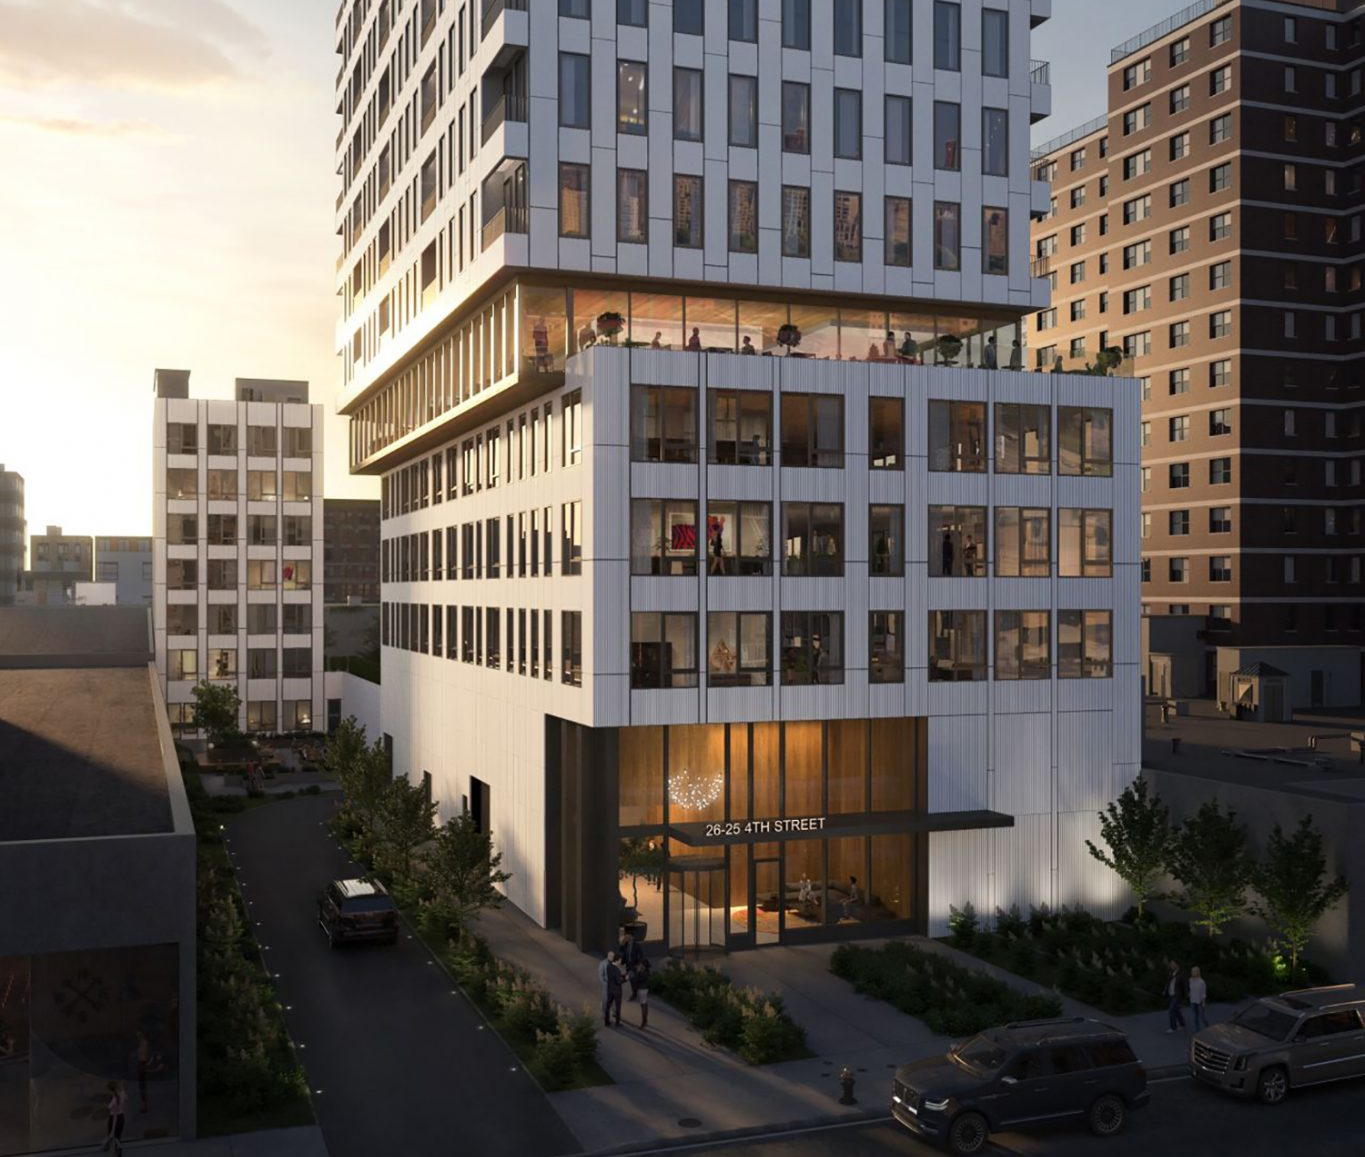 19-Story Building Coming To The Old Goodwill Location In Old Astoria